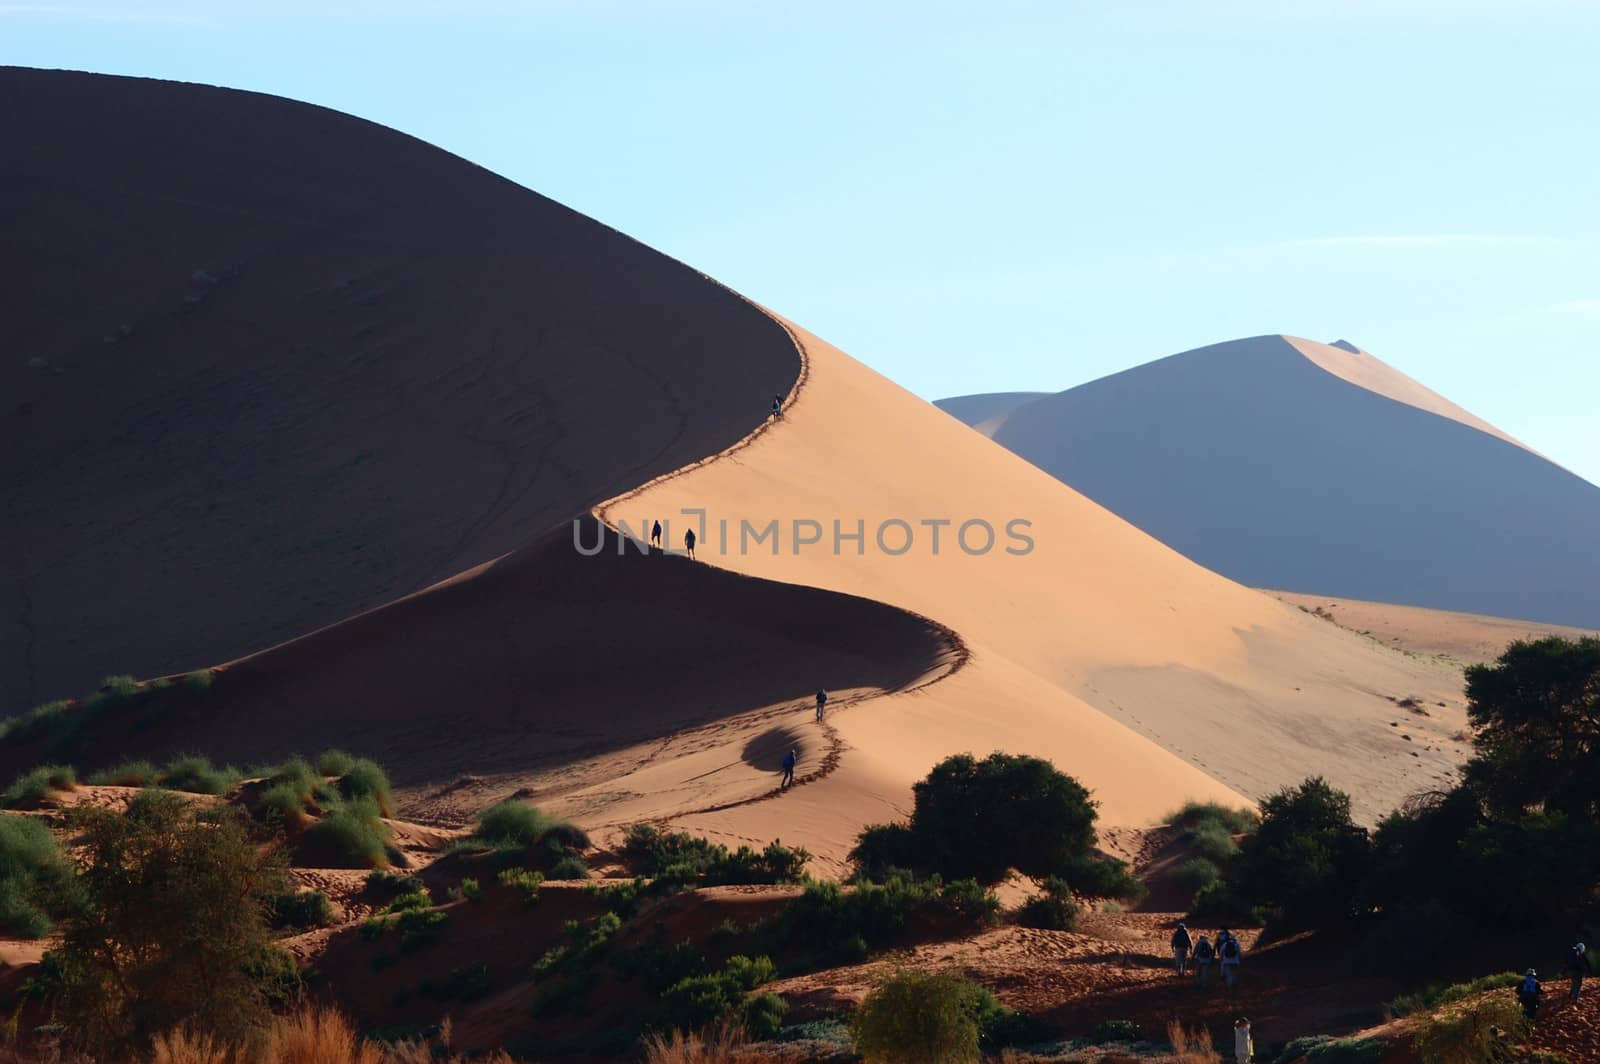 S-shaped dune next to Sossusvlei in Namibia 